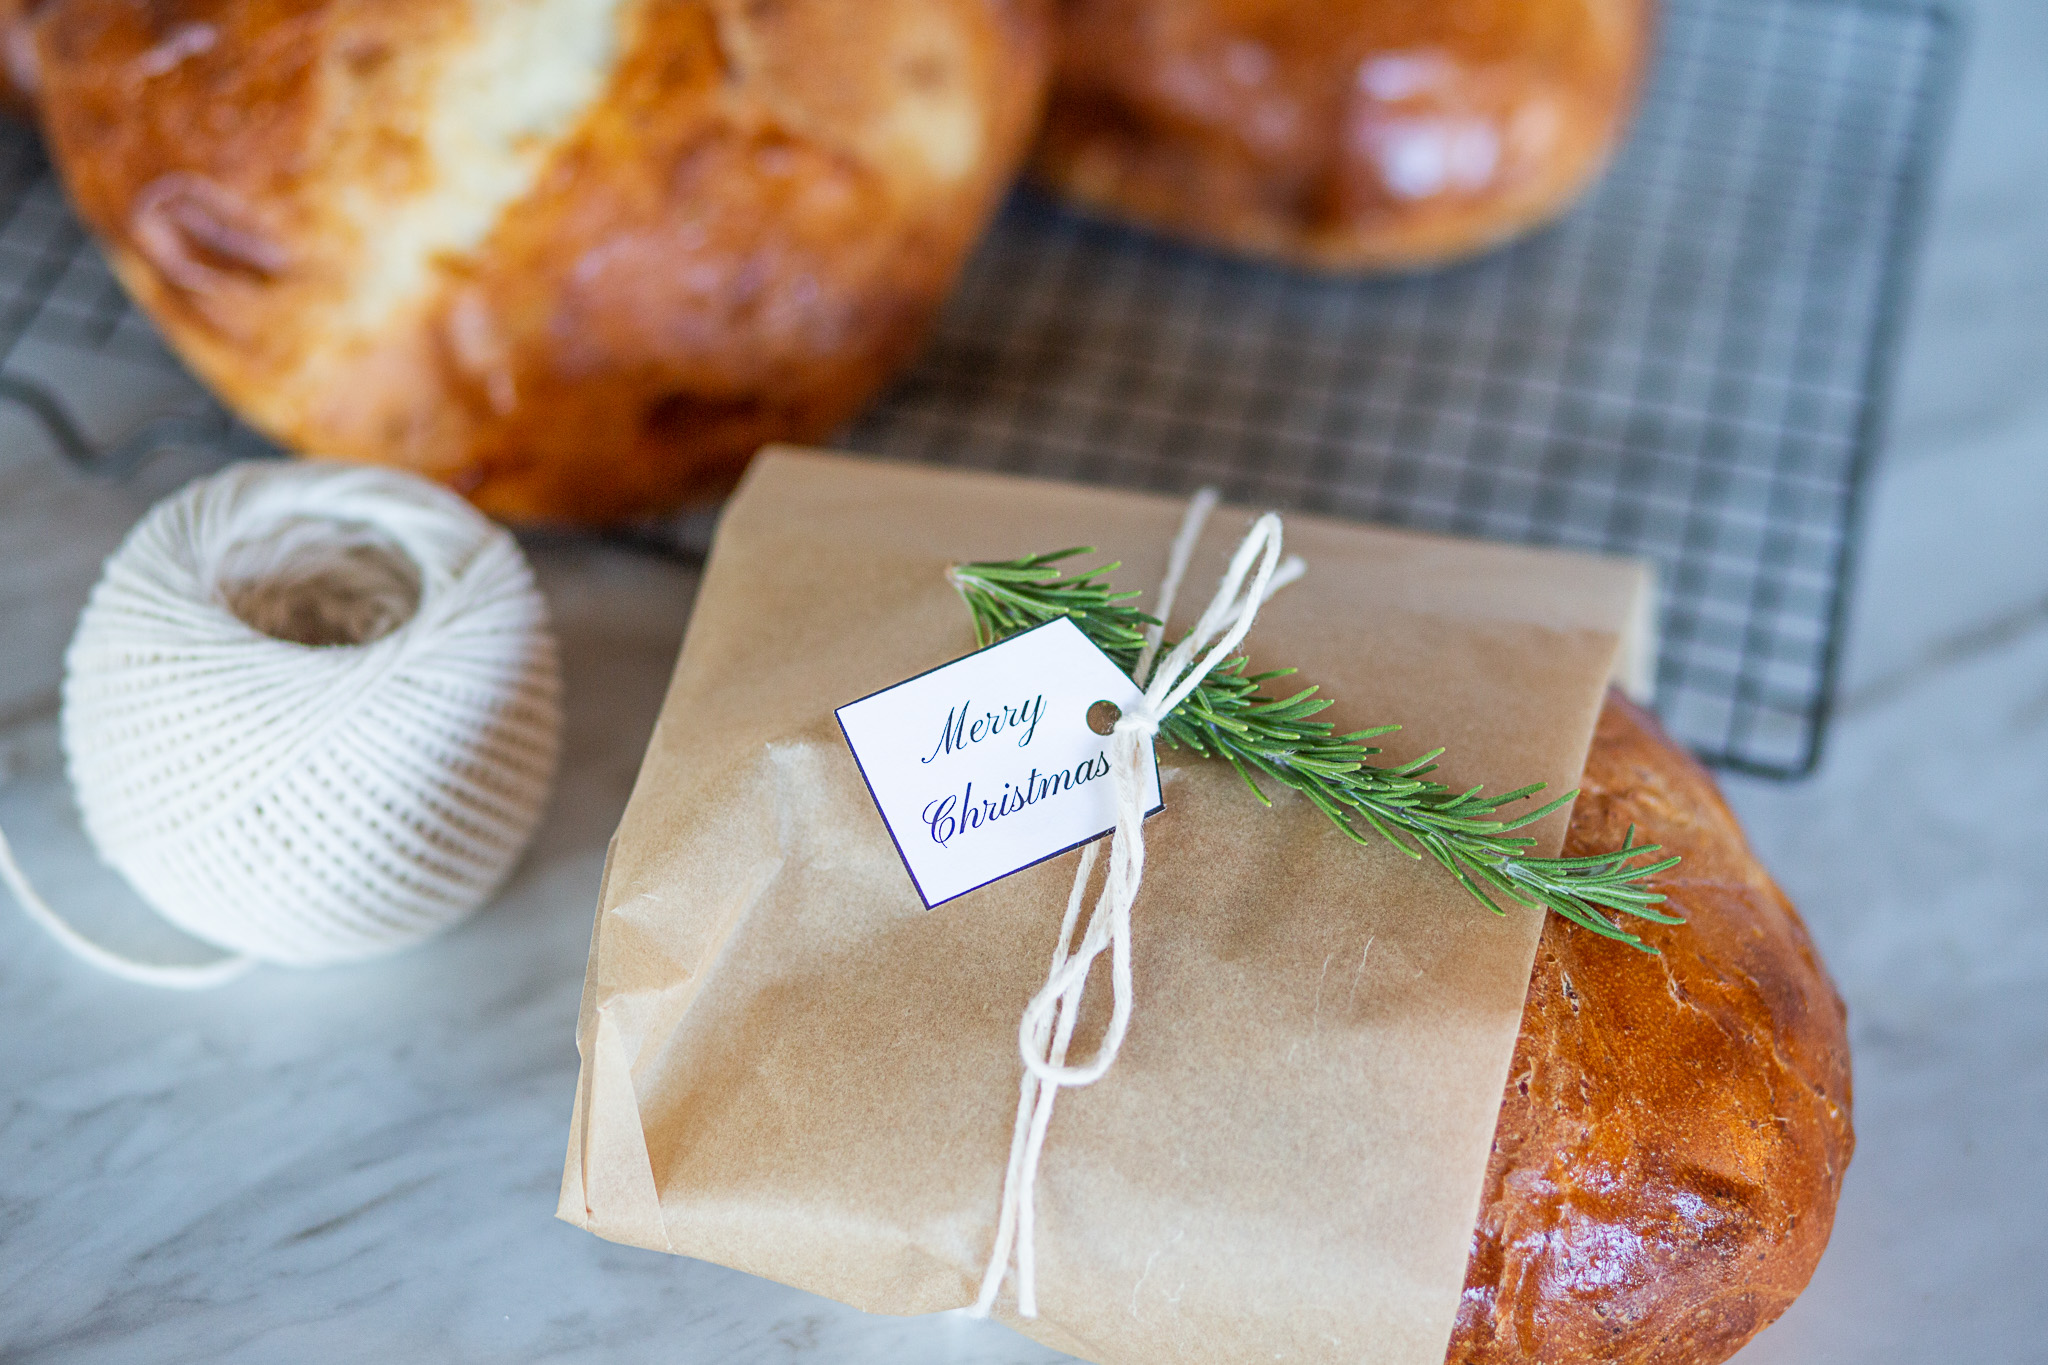 bread wrapped in parchment paper with gift tag